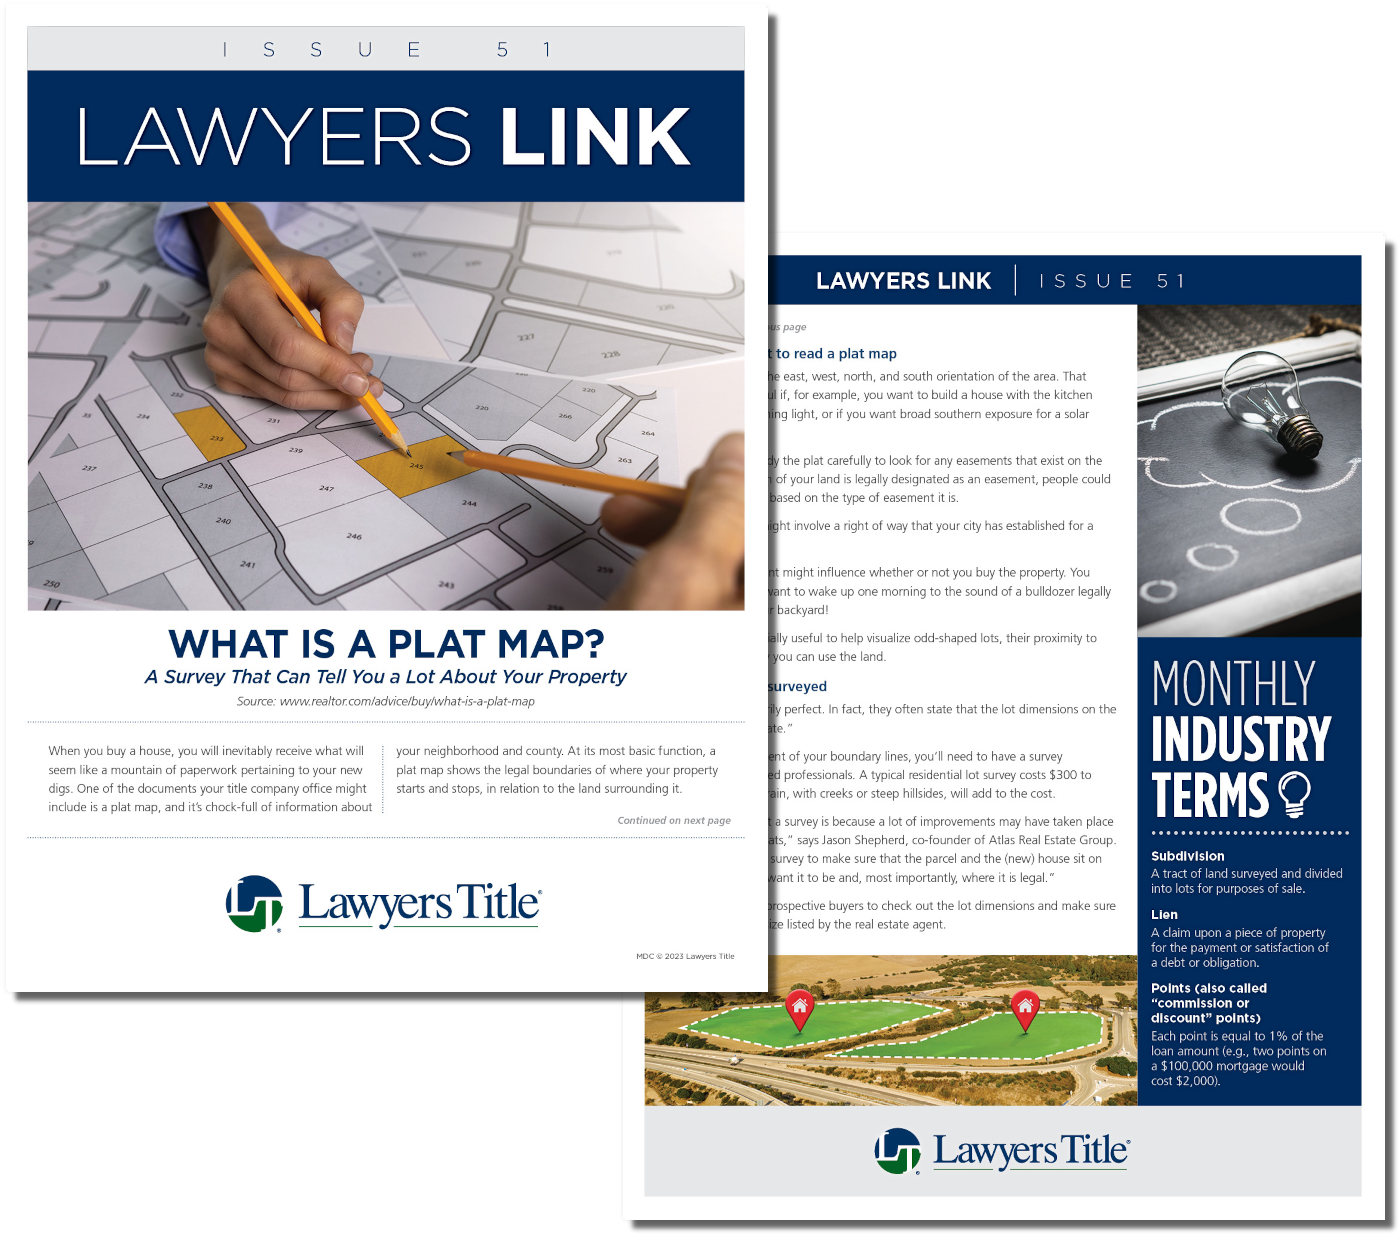 Lawyers Link